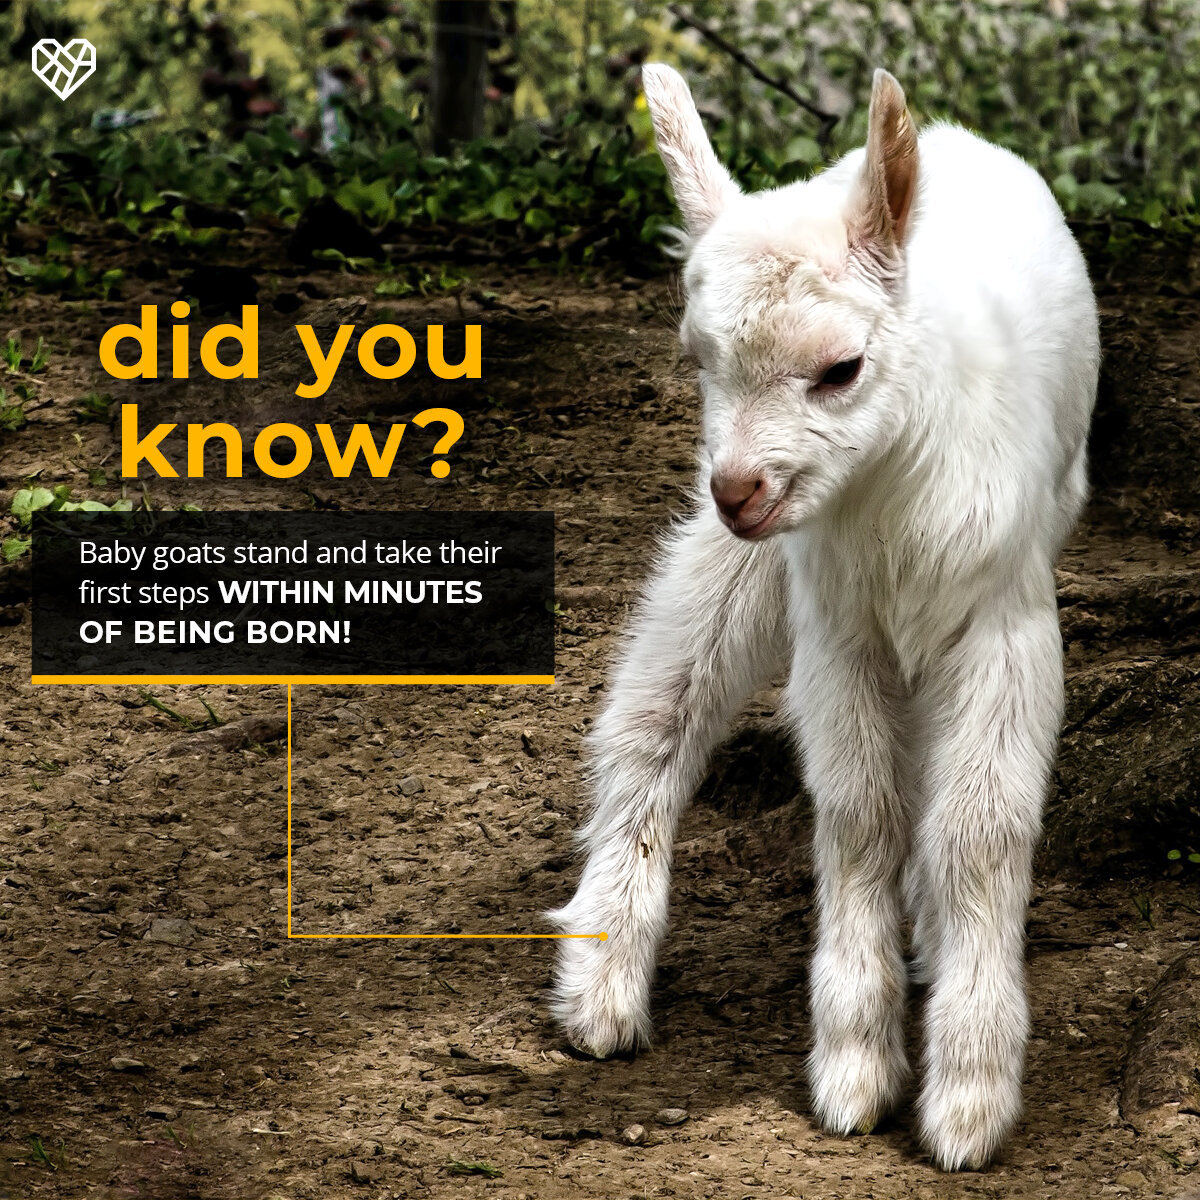 comms-sm-animal-facts-baby-goats-1-NEW.jpg